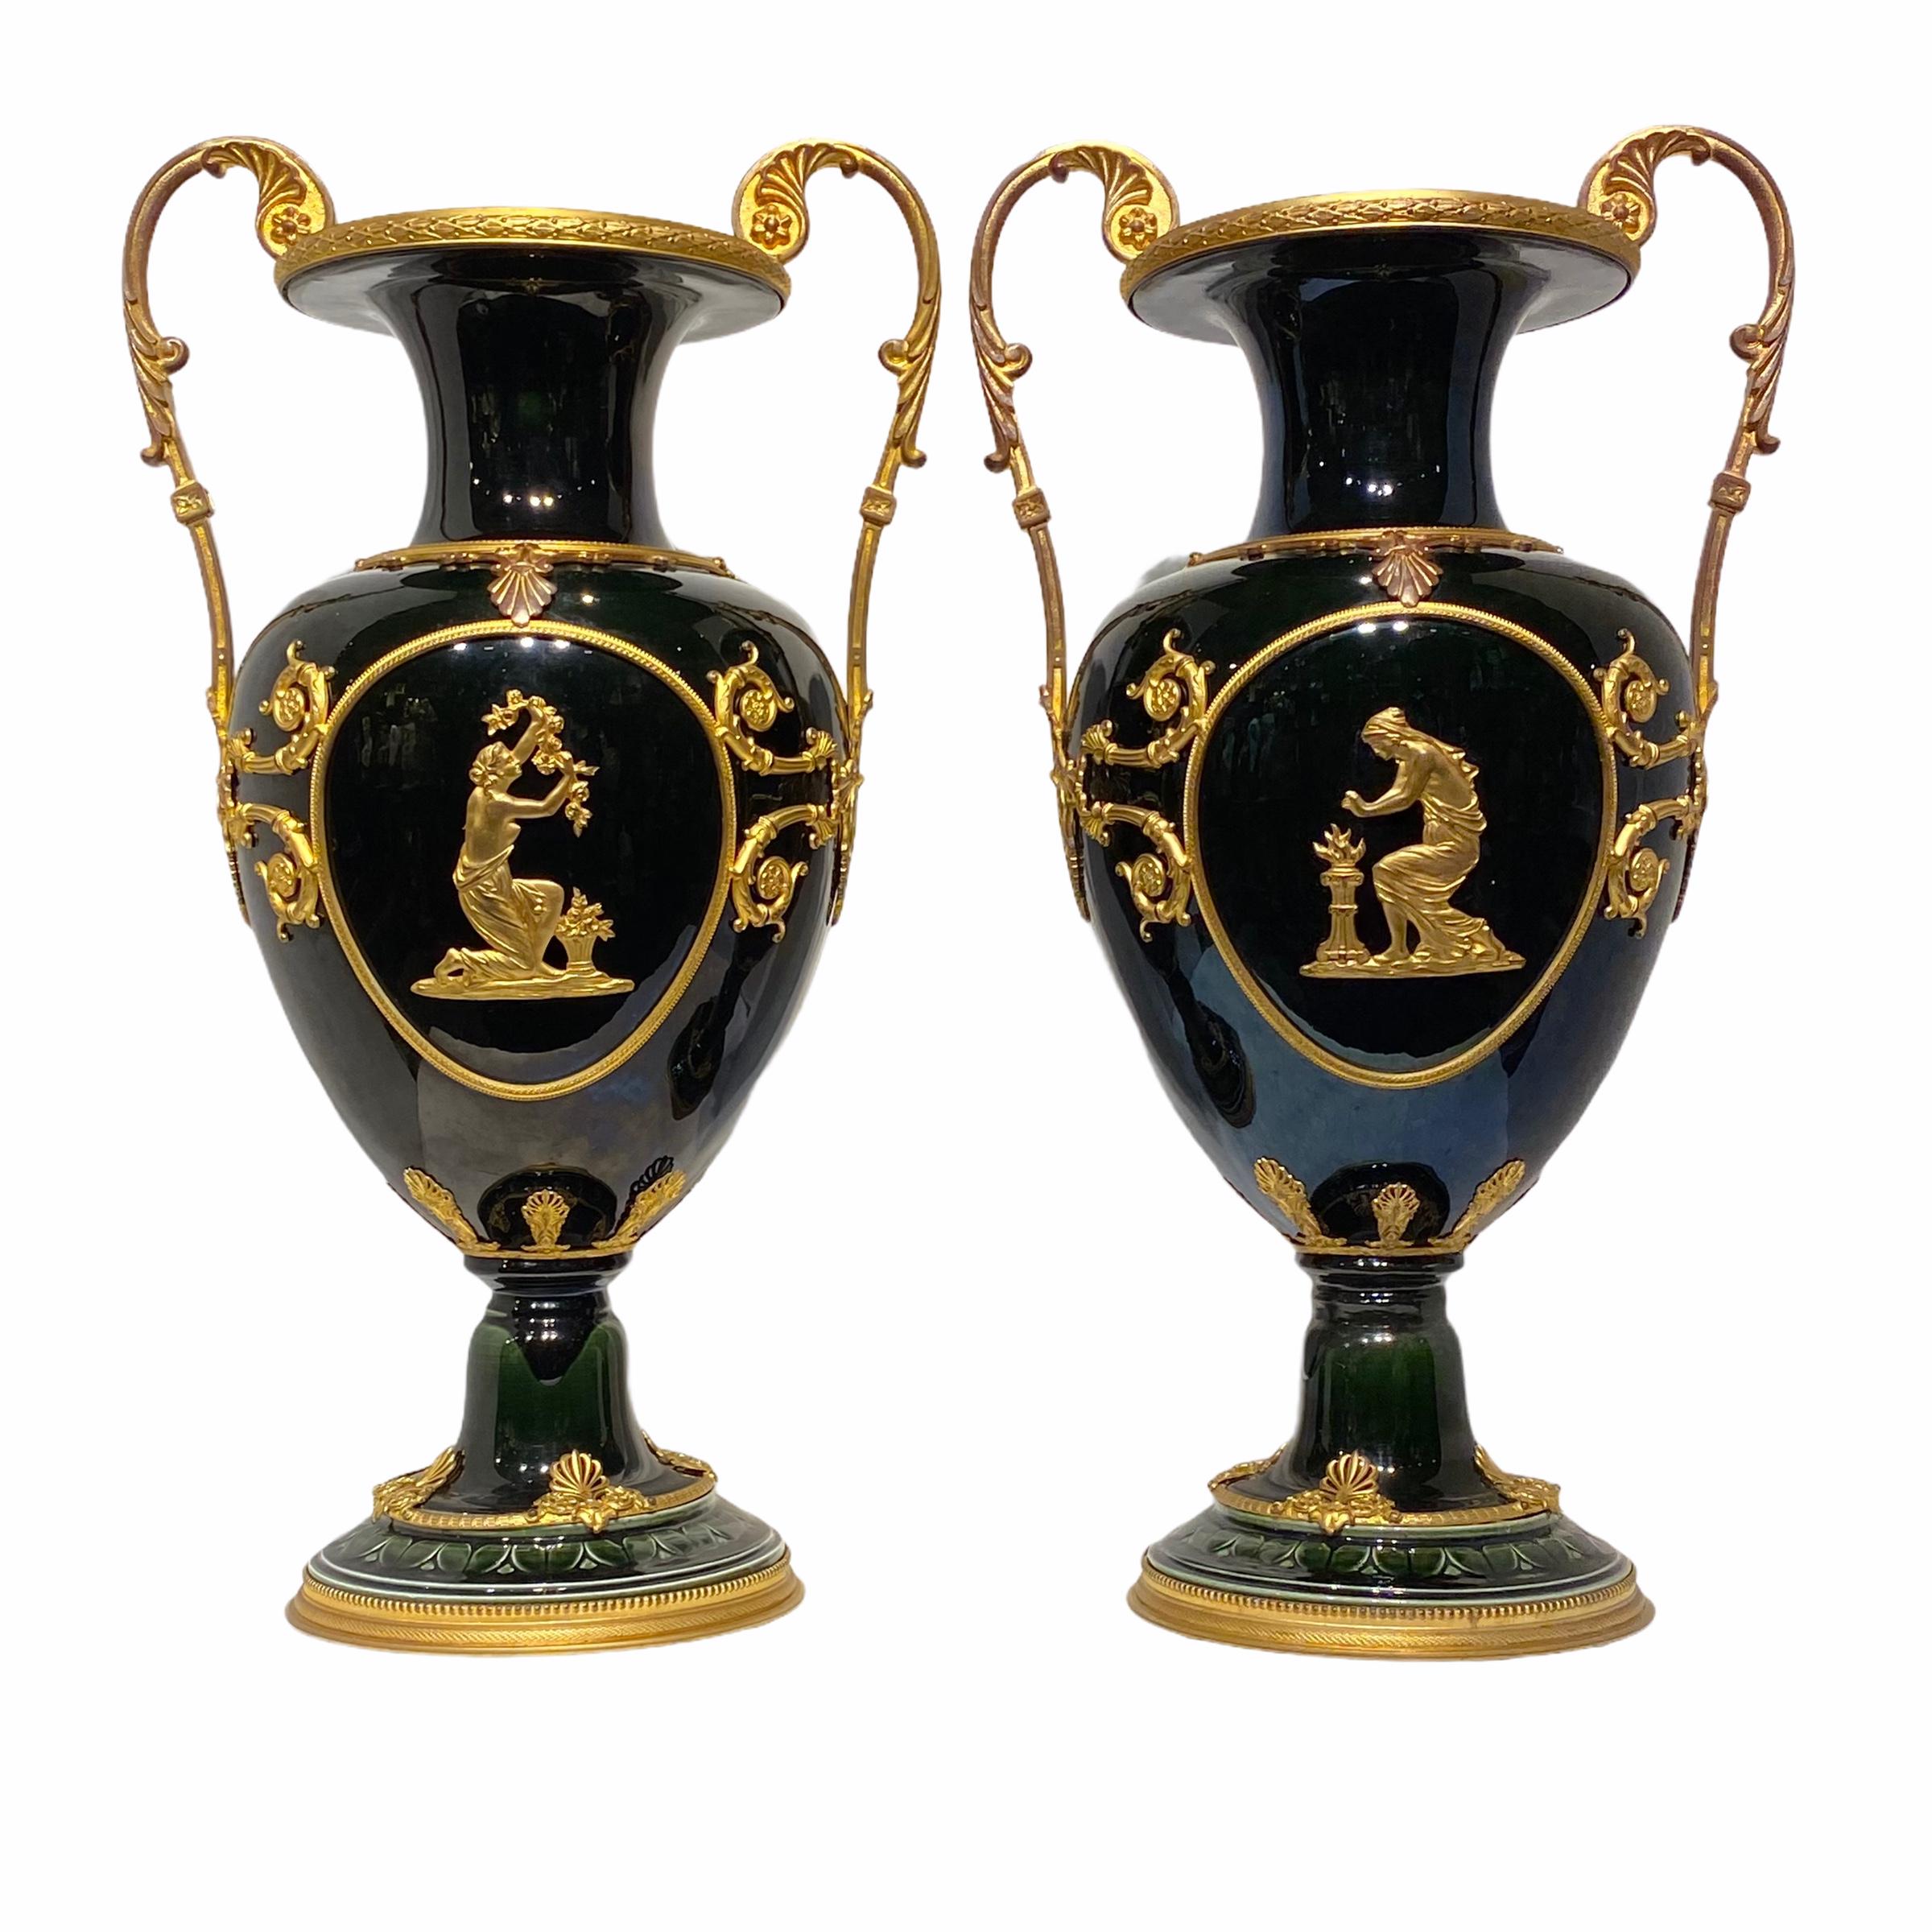 Very unusual and fine quality 19th century French Iridescent Glazed Faience vases with neoclassical gilt bronze mounts.